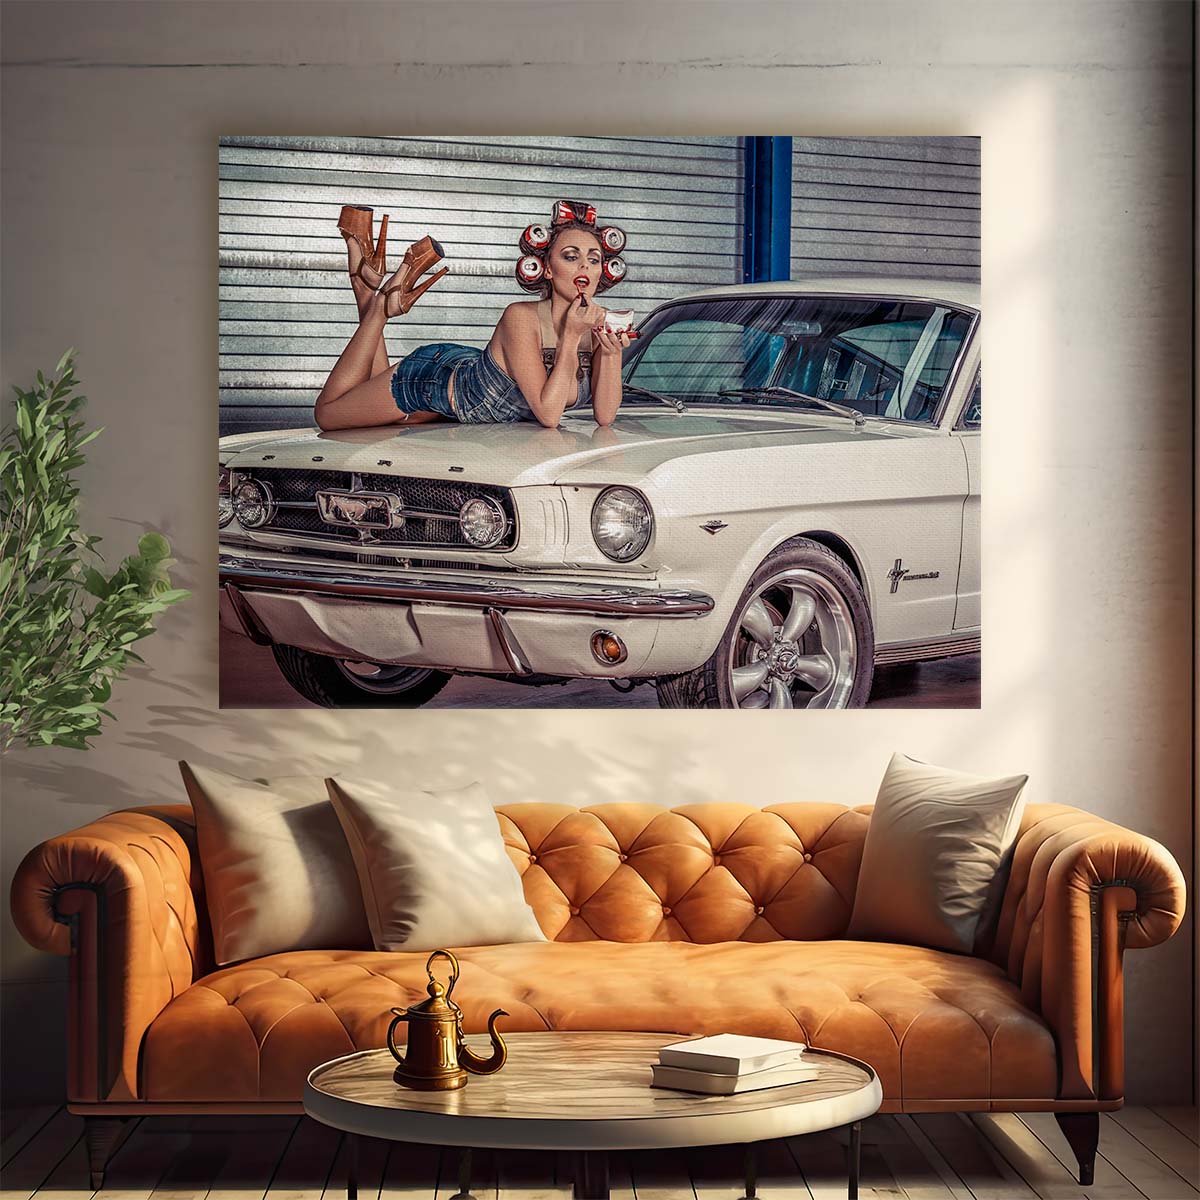 Vintage Pin-Up Girl on Classic Mustang Photography Wall Art